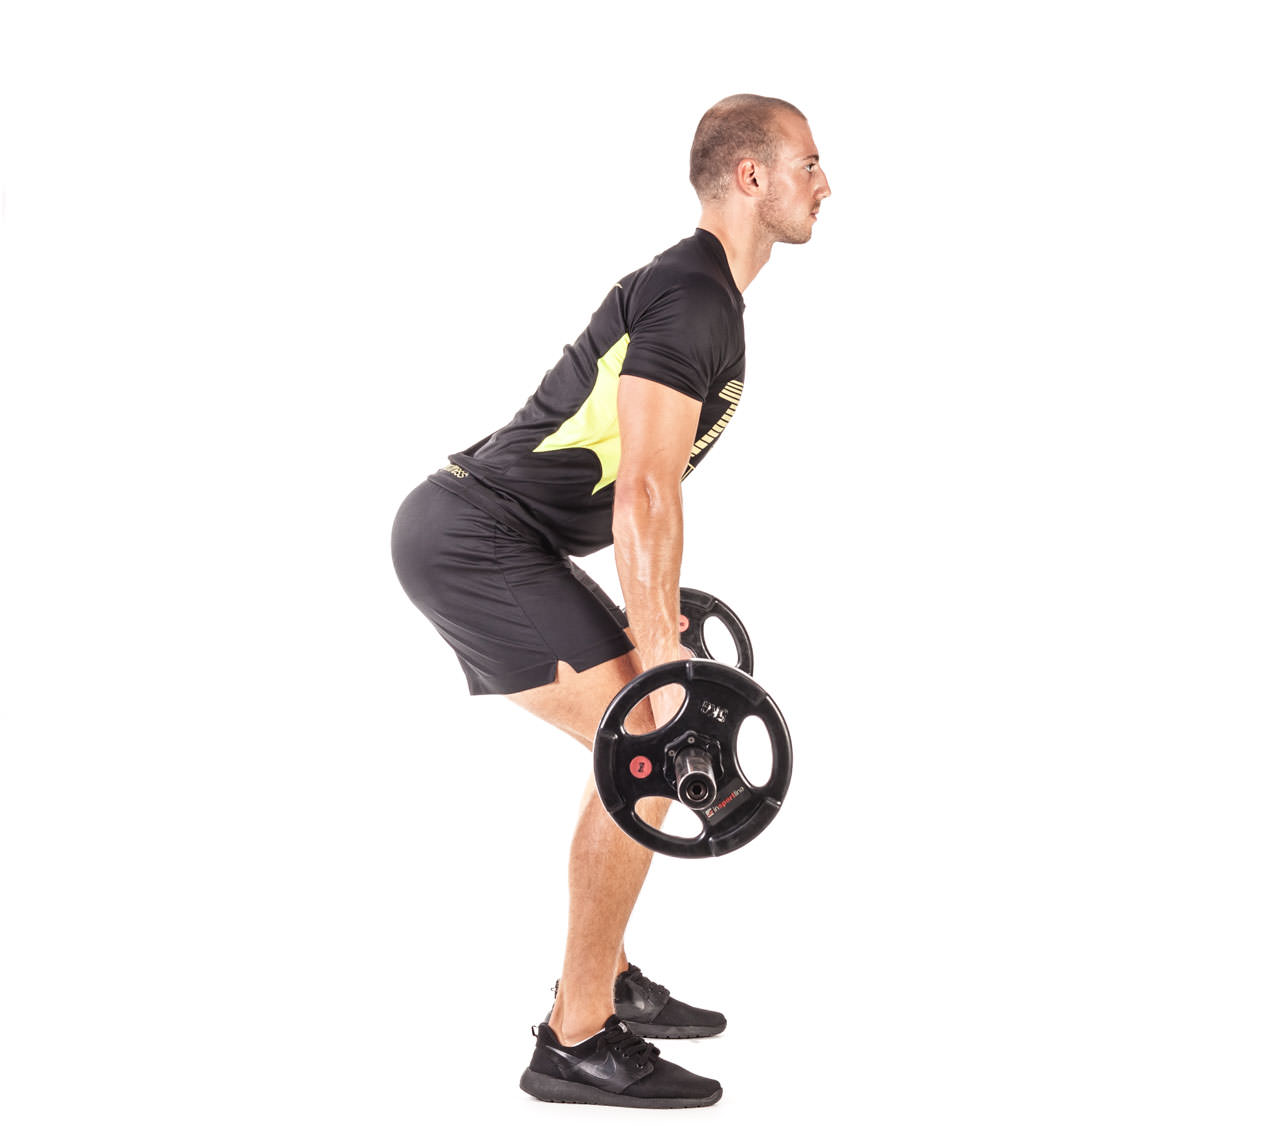 Barbell Bent Over Row (Reverse Grip) frame #4